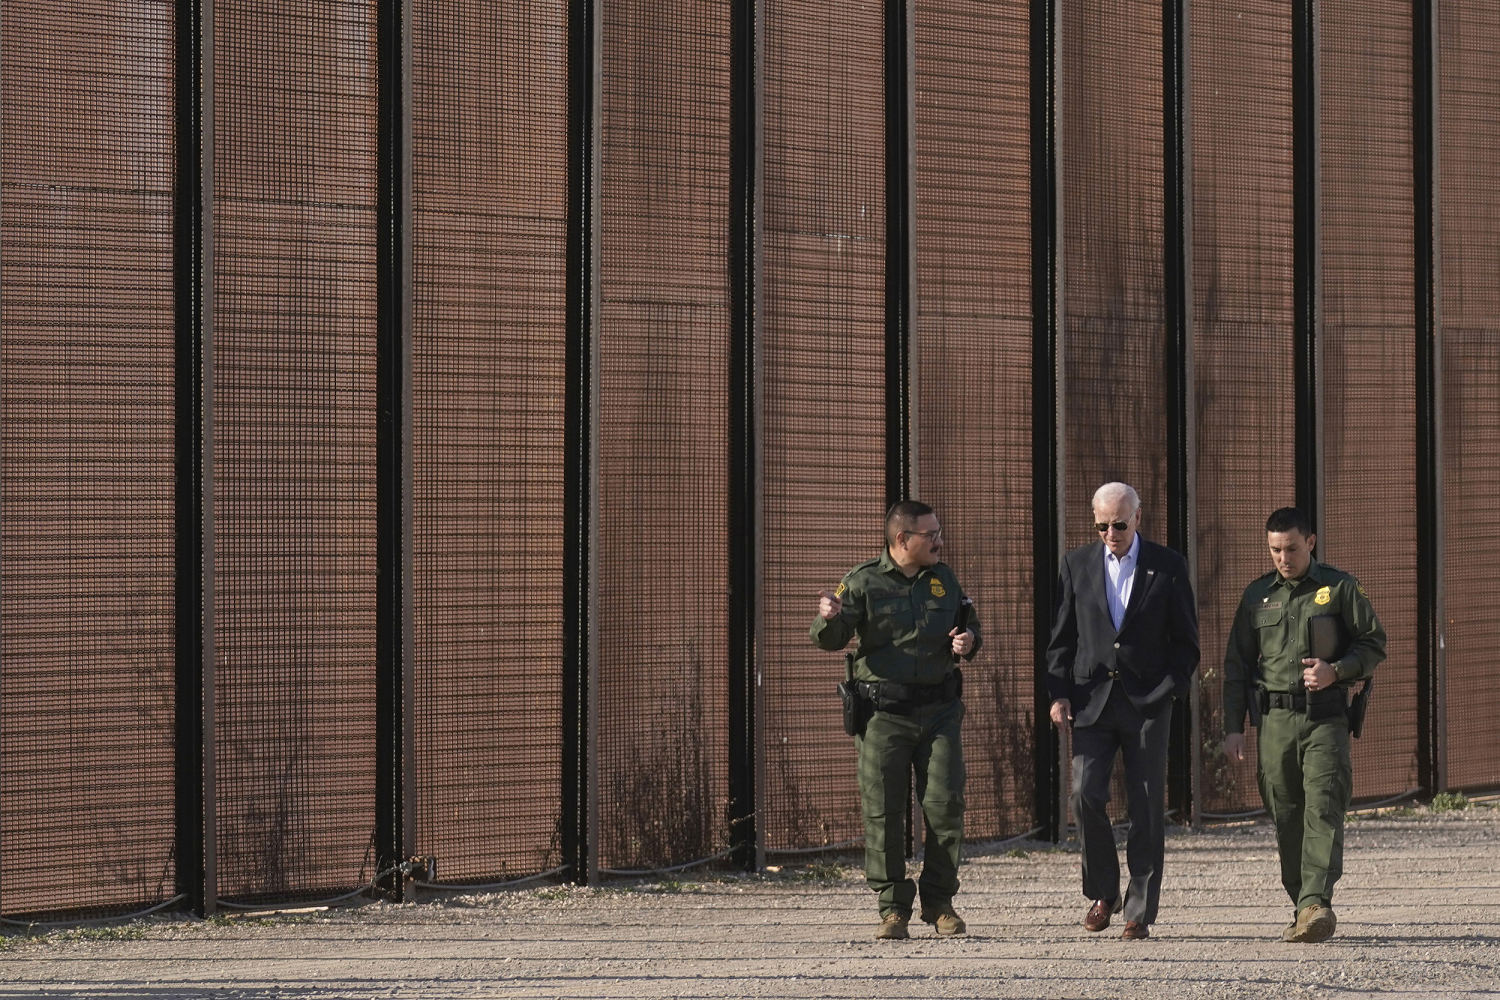 biden promises to 'shut down' the border if given the authority in a bipartisan bill